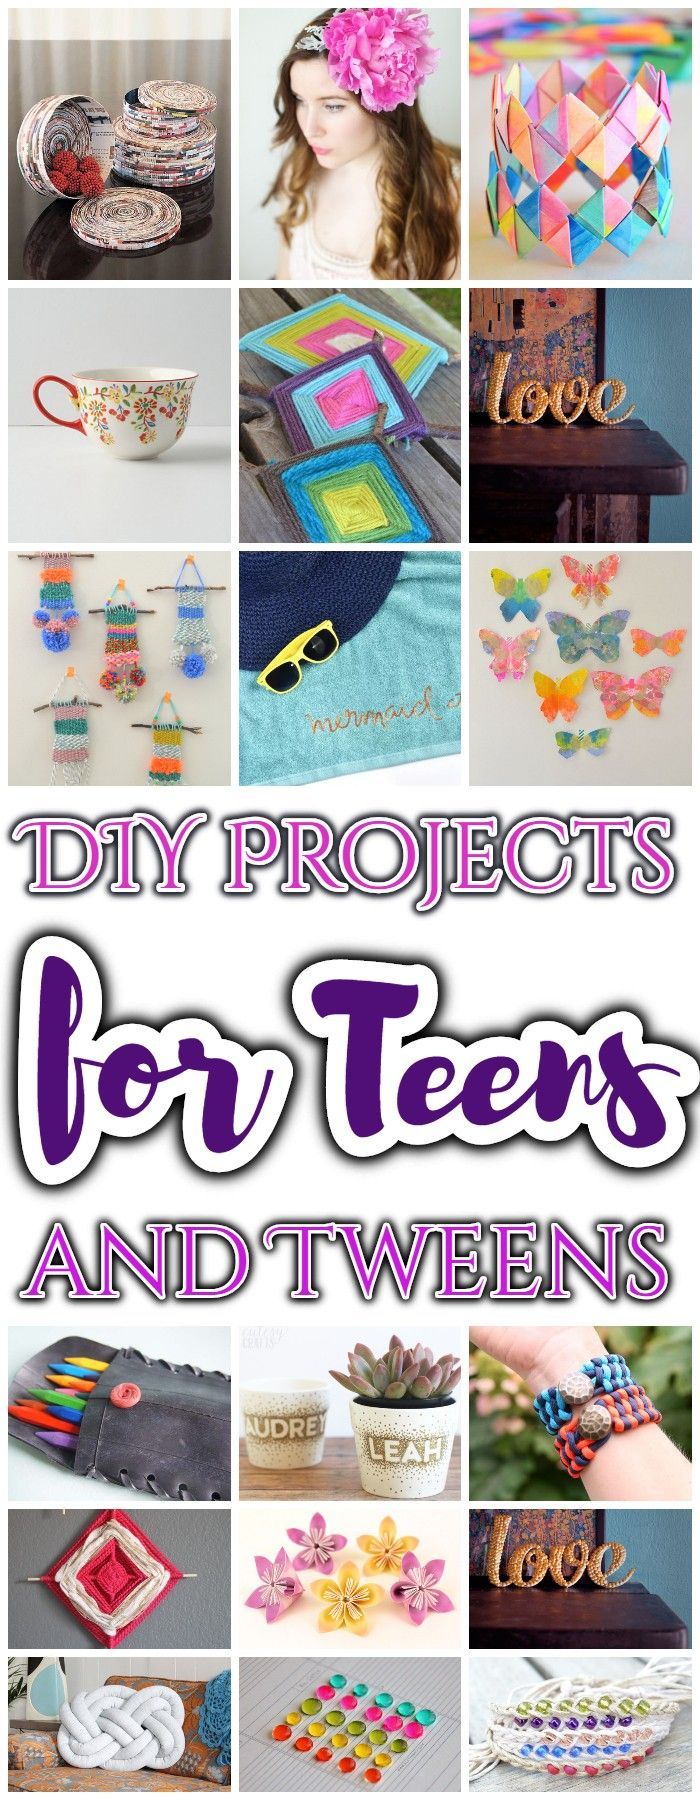 25 Cheap DIY Projects for Teens and Tweens -   17 diy projects For Teen Girls crafts ideas